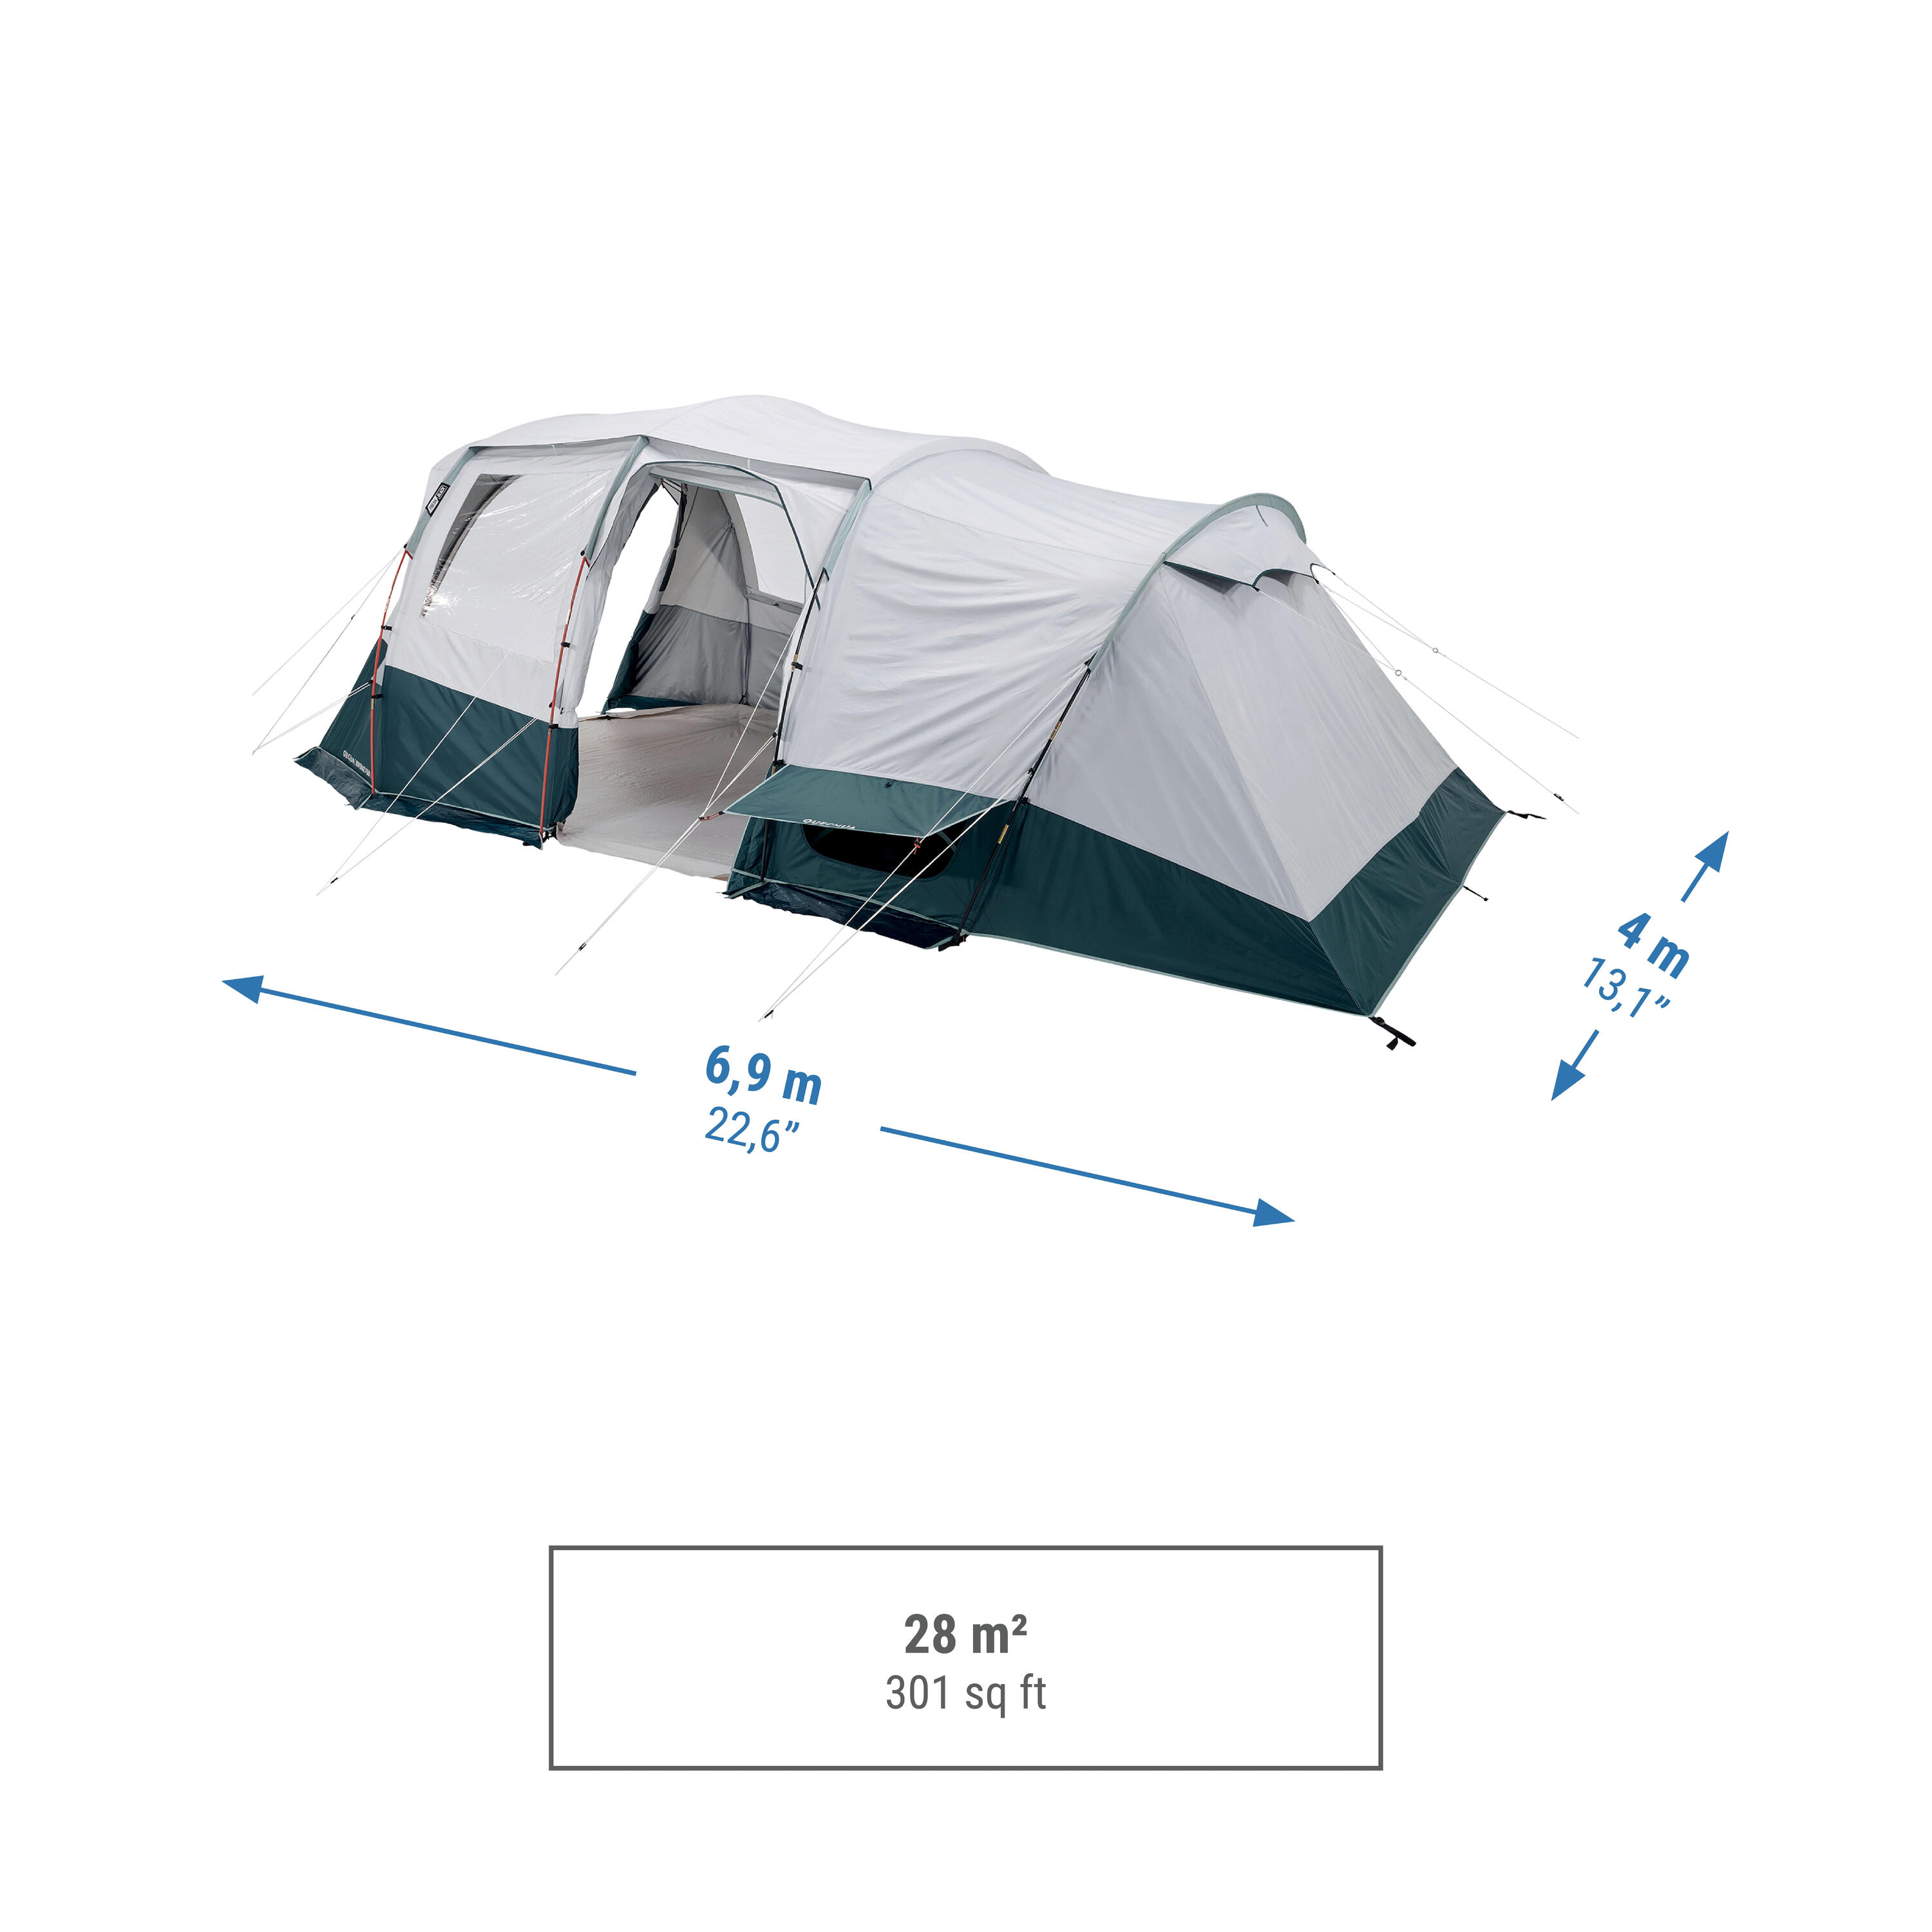 Camping tent with poles - Arpenaz 6.3 F&B - 6 Person - 3 Bedrooms 5/35